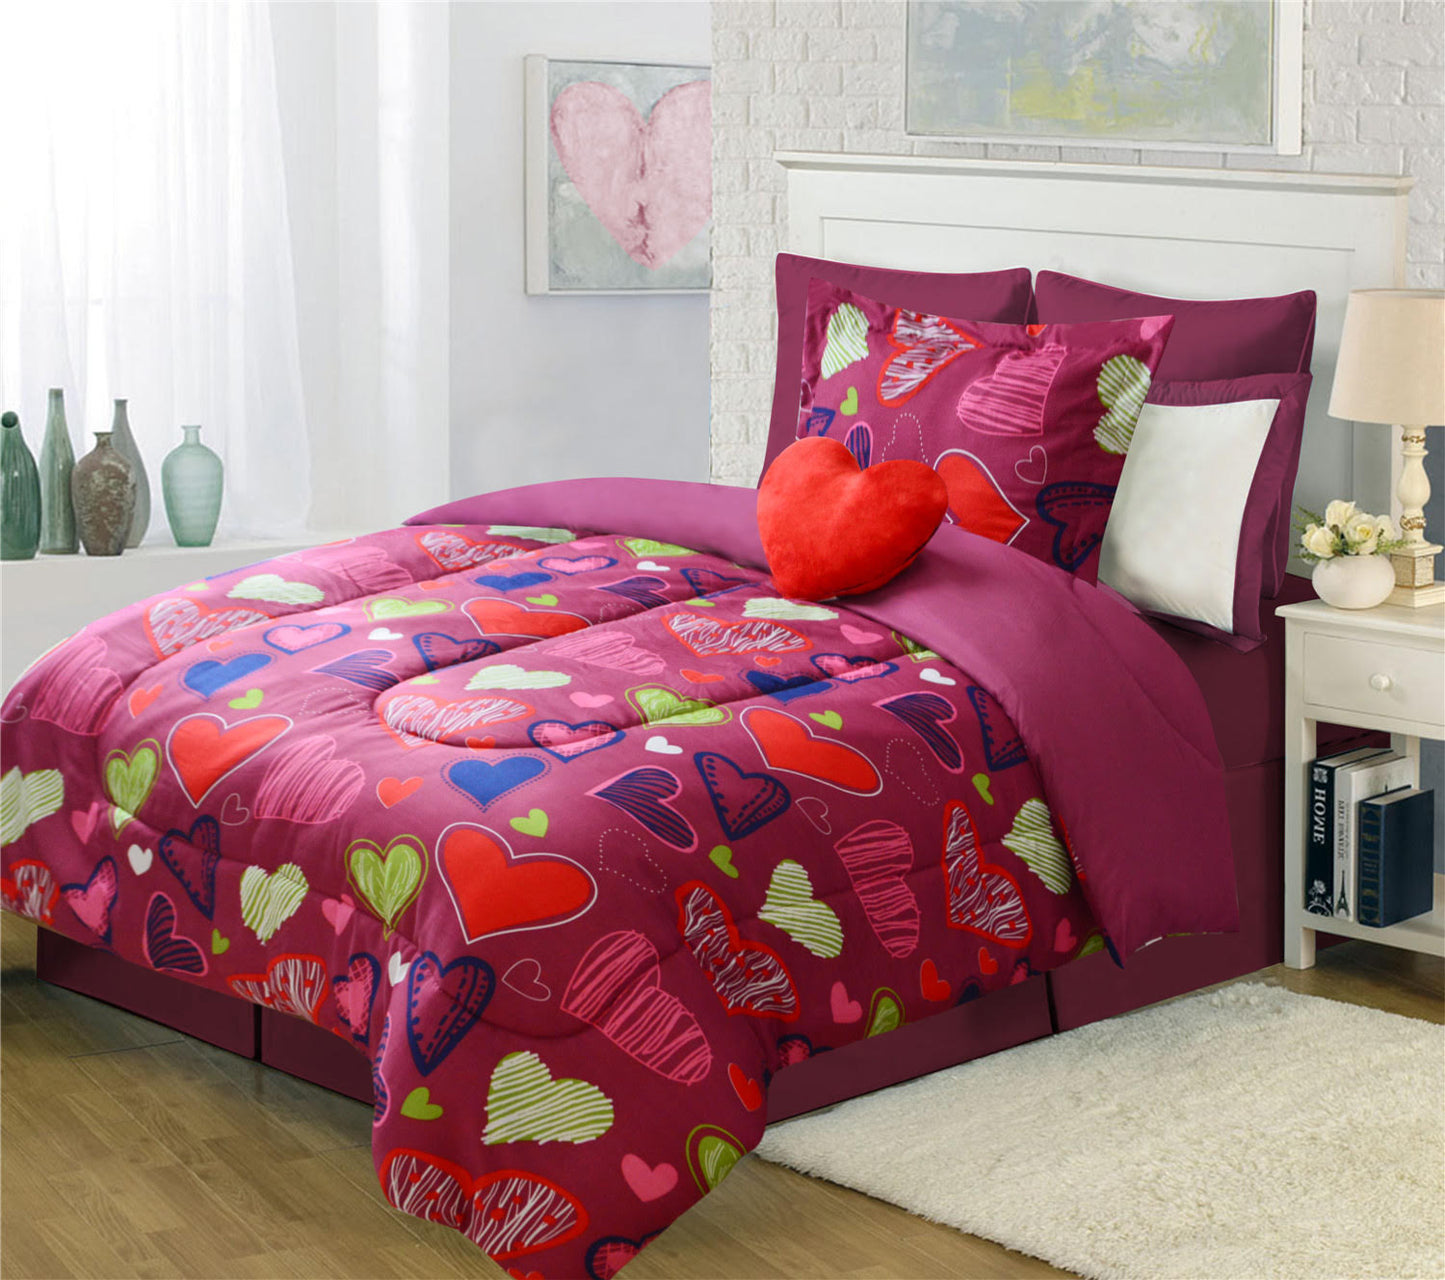 Comforter with Toy AHF-6642 - Full